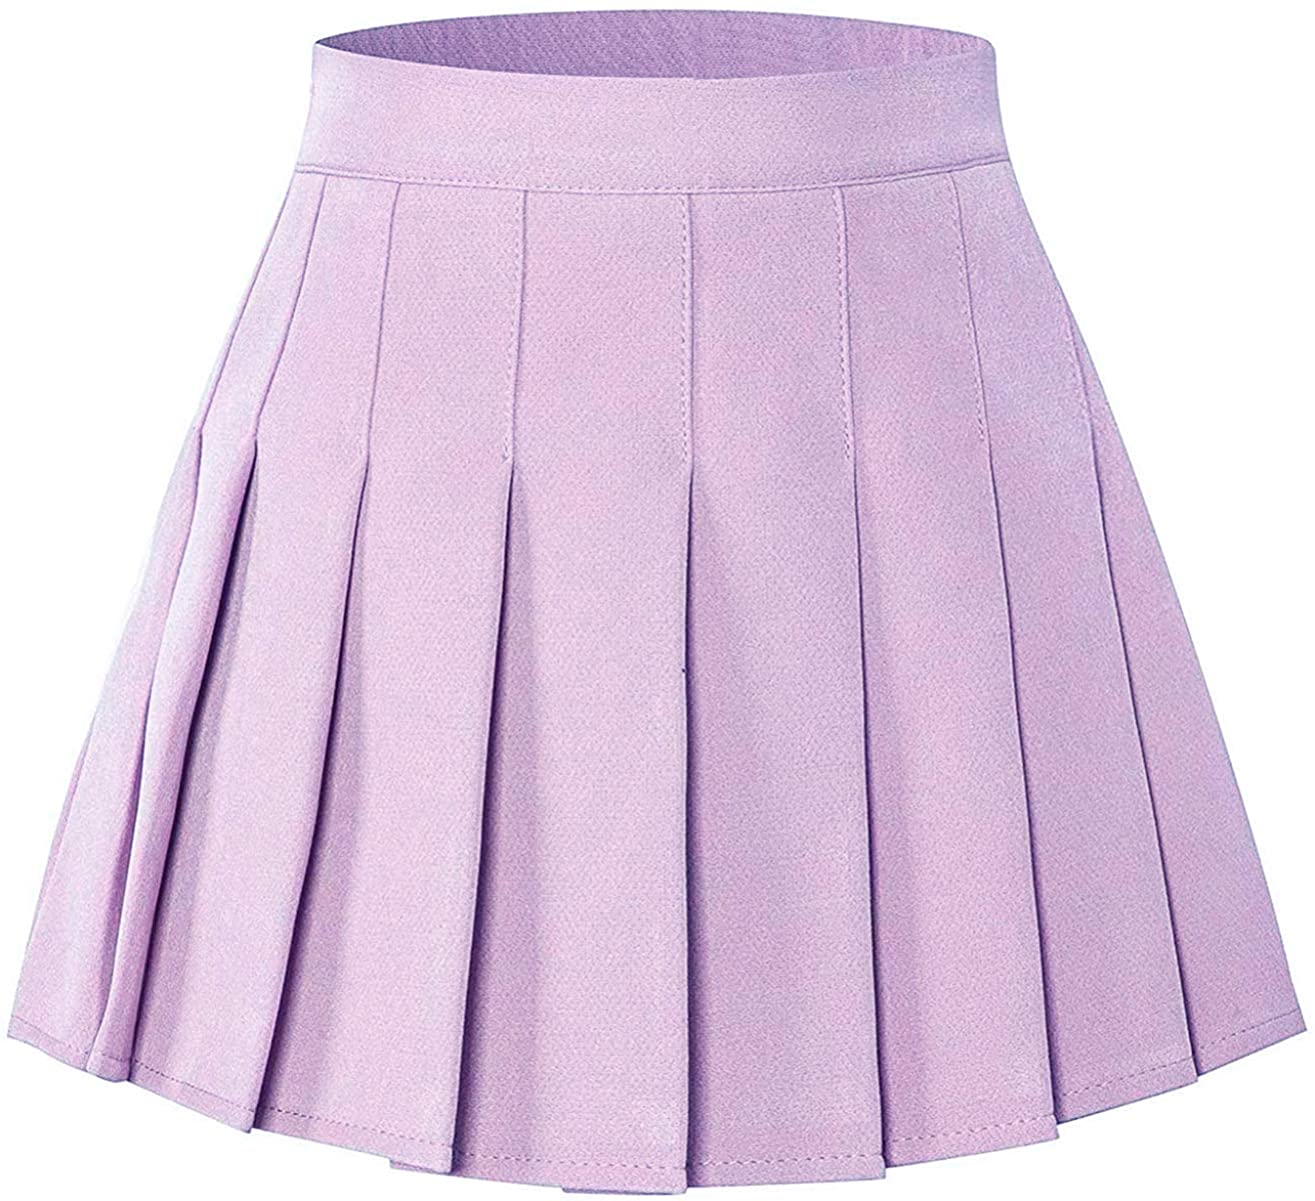 2 Years US 3XL SANGTREE Girls Women's Pleated Skirt with Comfy Stretchy Band